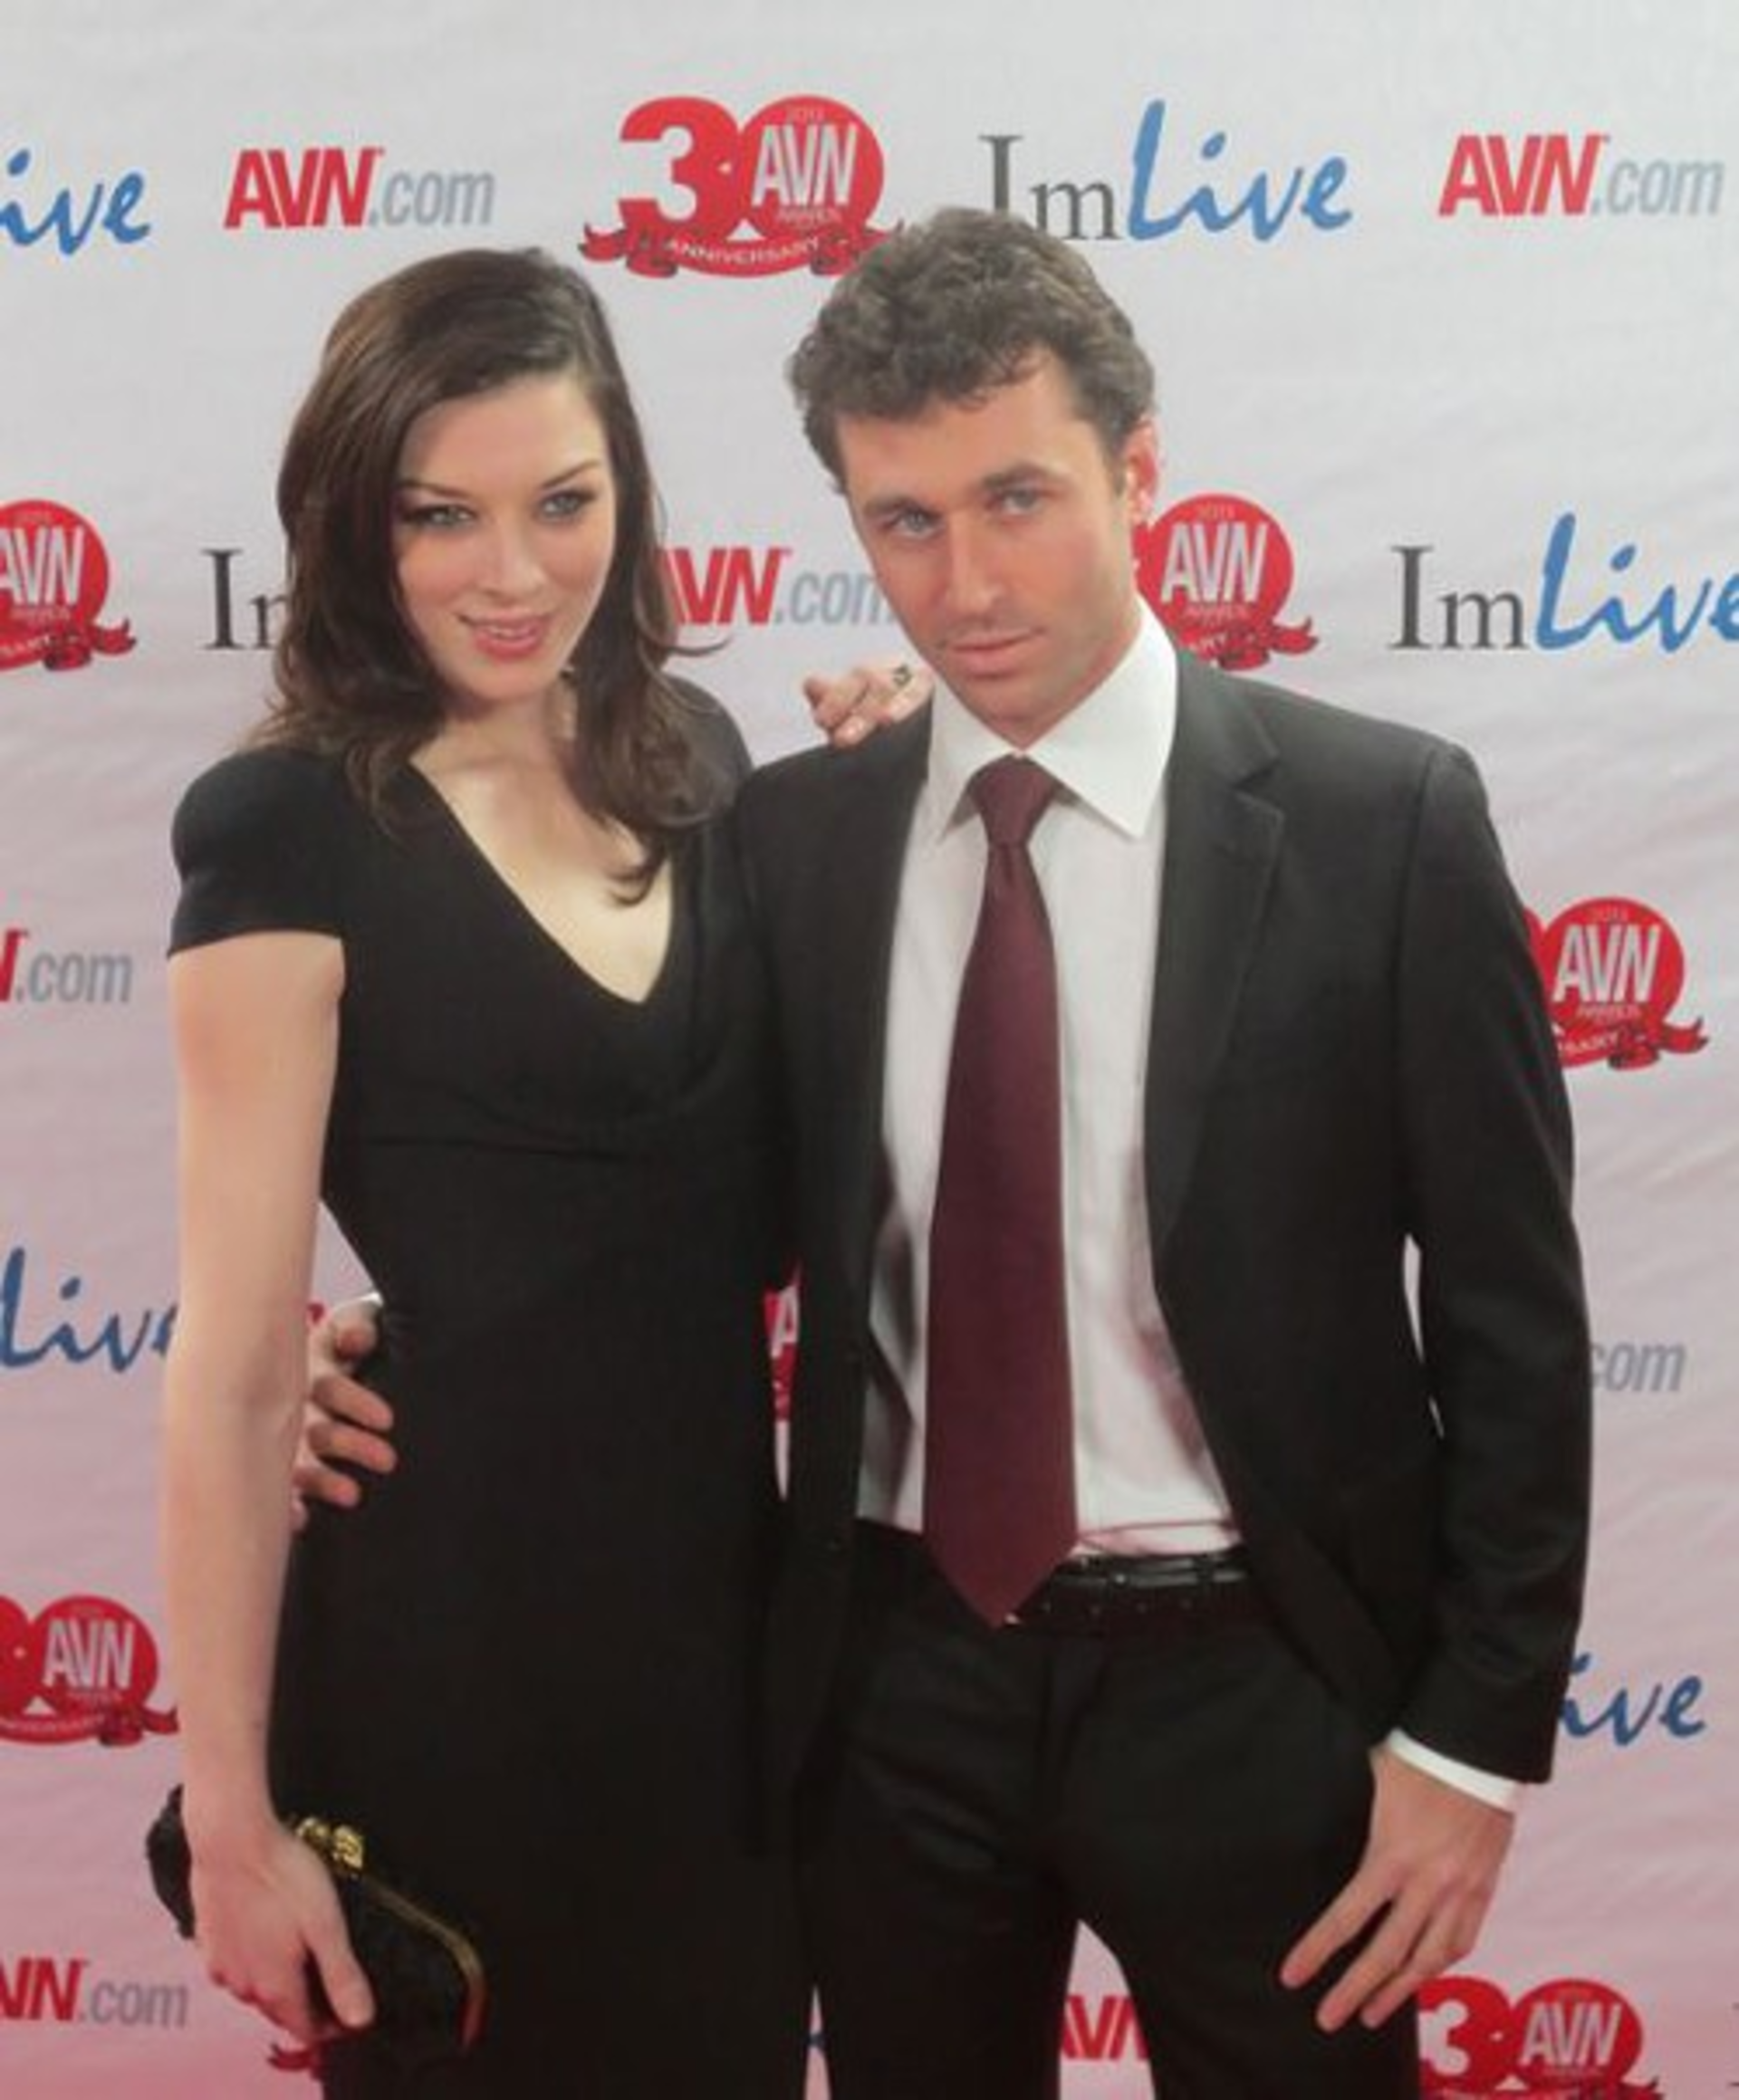 James Deen, the cock star next door Tampa Bay News Tampa Creative Loafing Tampa picture